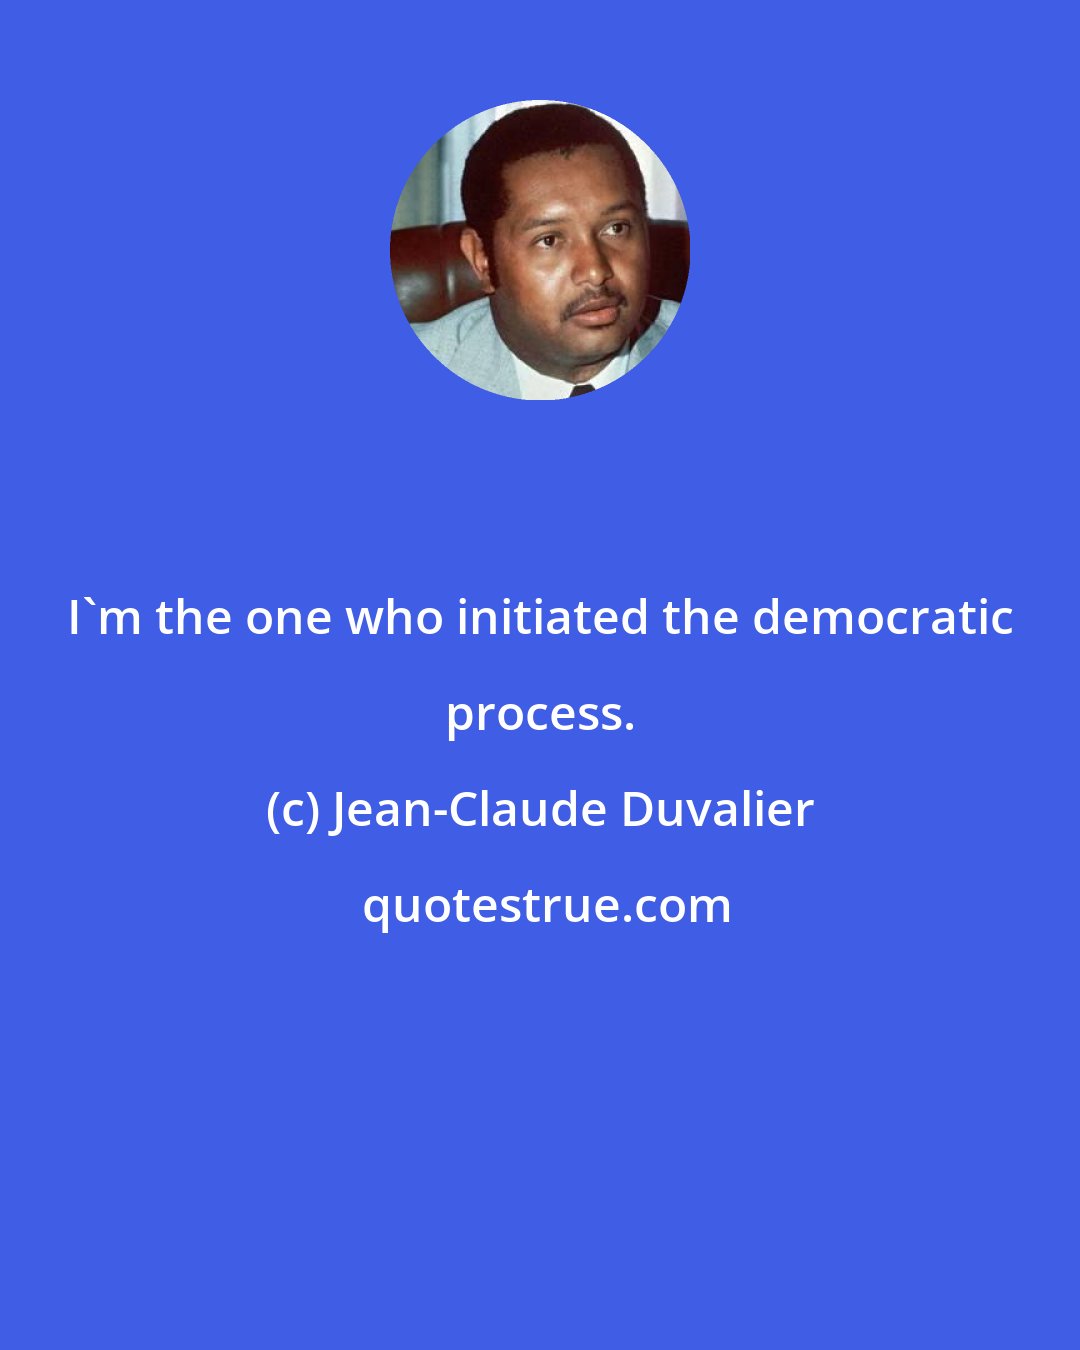 Jean-Claude Duvalier: I'm the one who initiated the democratic process.